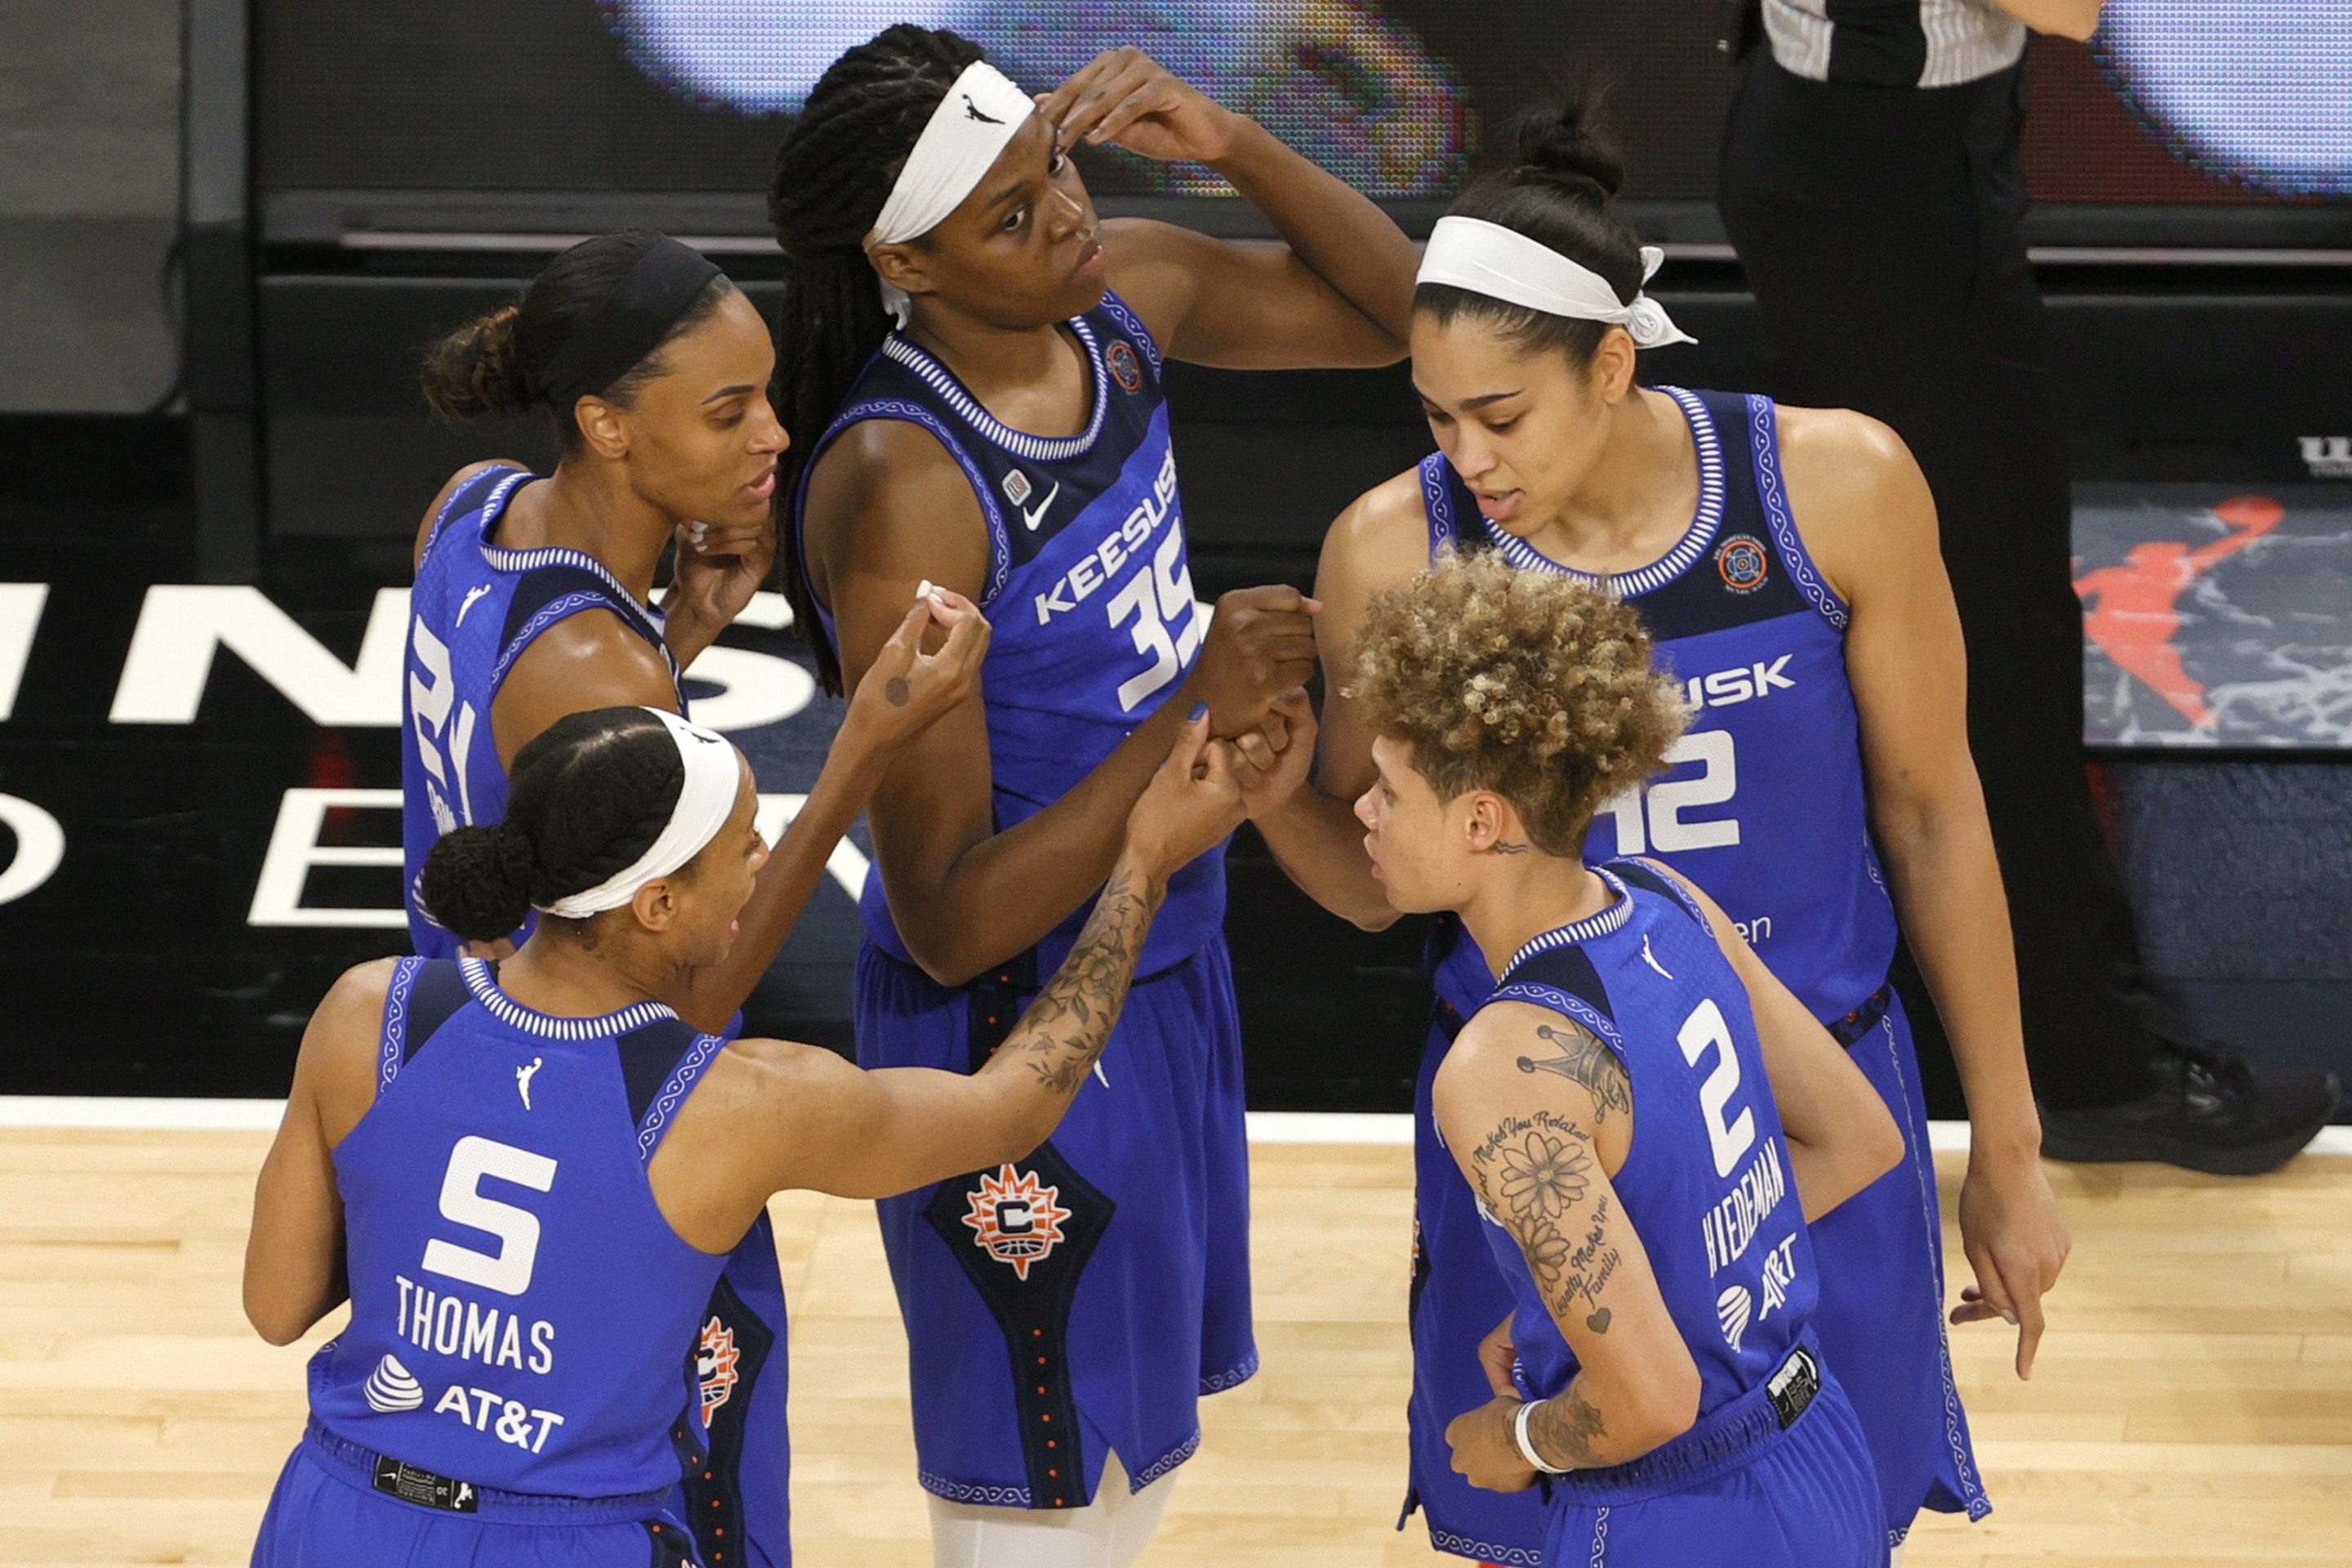 Jasmine Thomas #5, DeWanna Bonner #24, Jonquel Jones #35, Natisha Hiedeman #2 and Brionna Jones #42 of the Connecticut Sun huddle on the court before their game against the Las Vegas Aces at Michelob ULTRA Arena on May 23, 2021 in Las Vegas, Nevada. The Sun defeated the Aces 72-65.